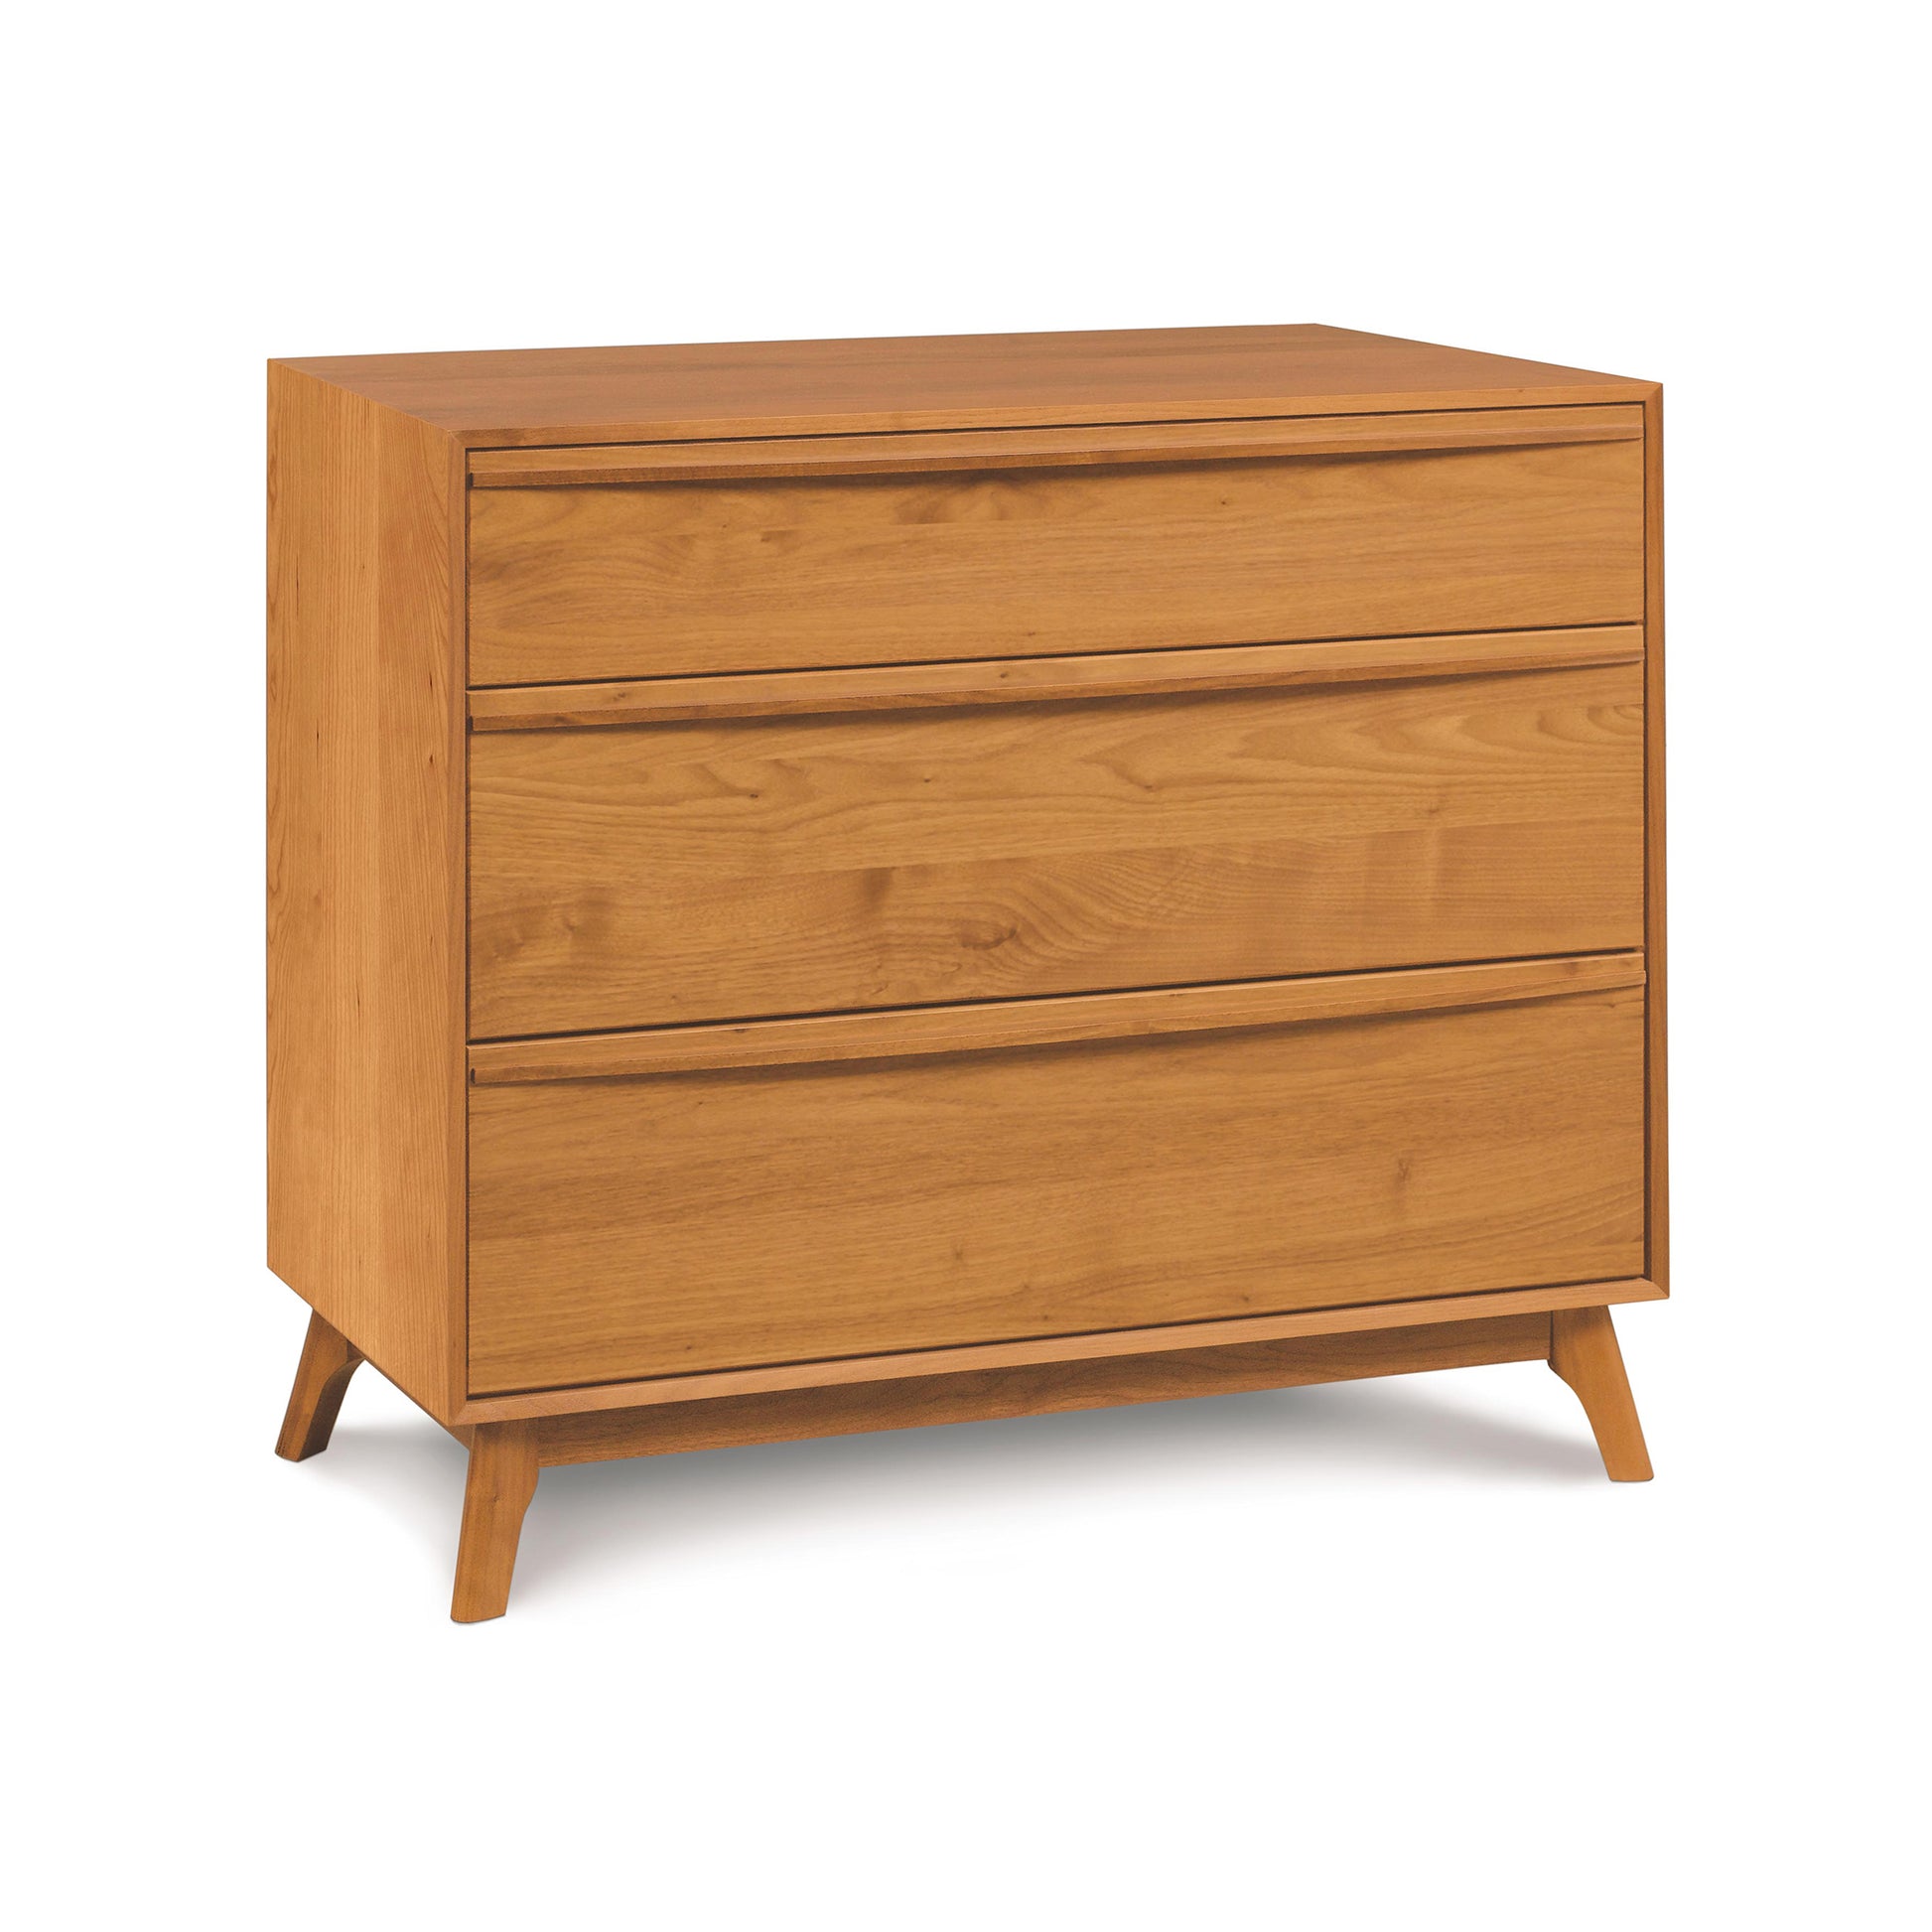 A modern bedroom Catalina 3-Drawer Chest by Copeland Furniture on a white background.